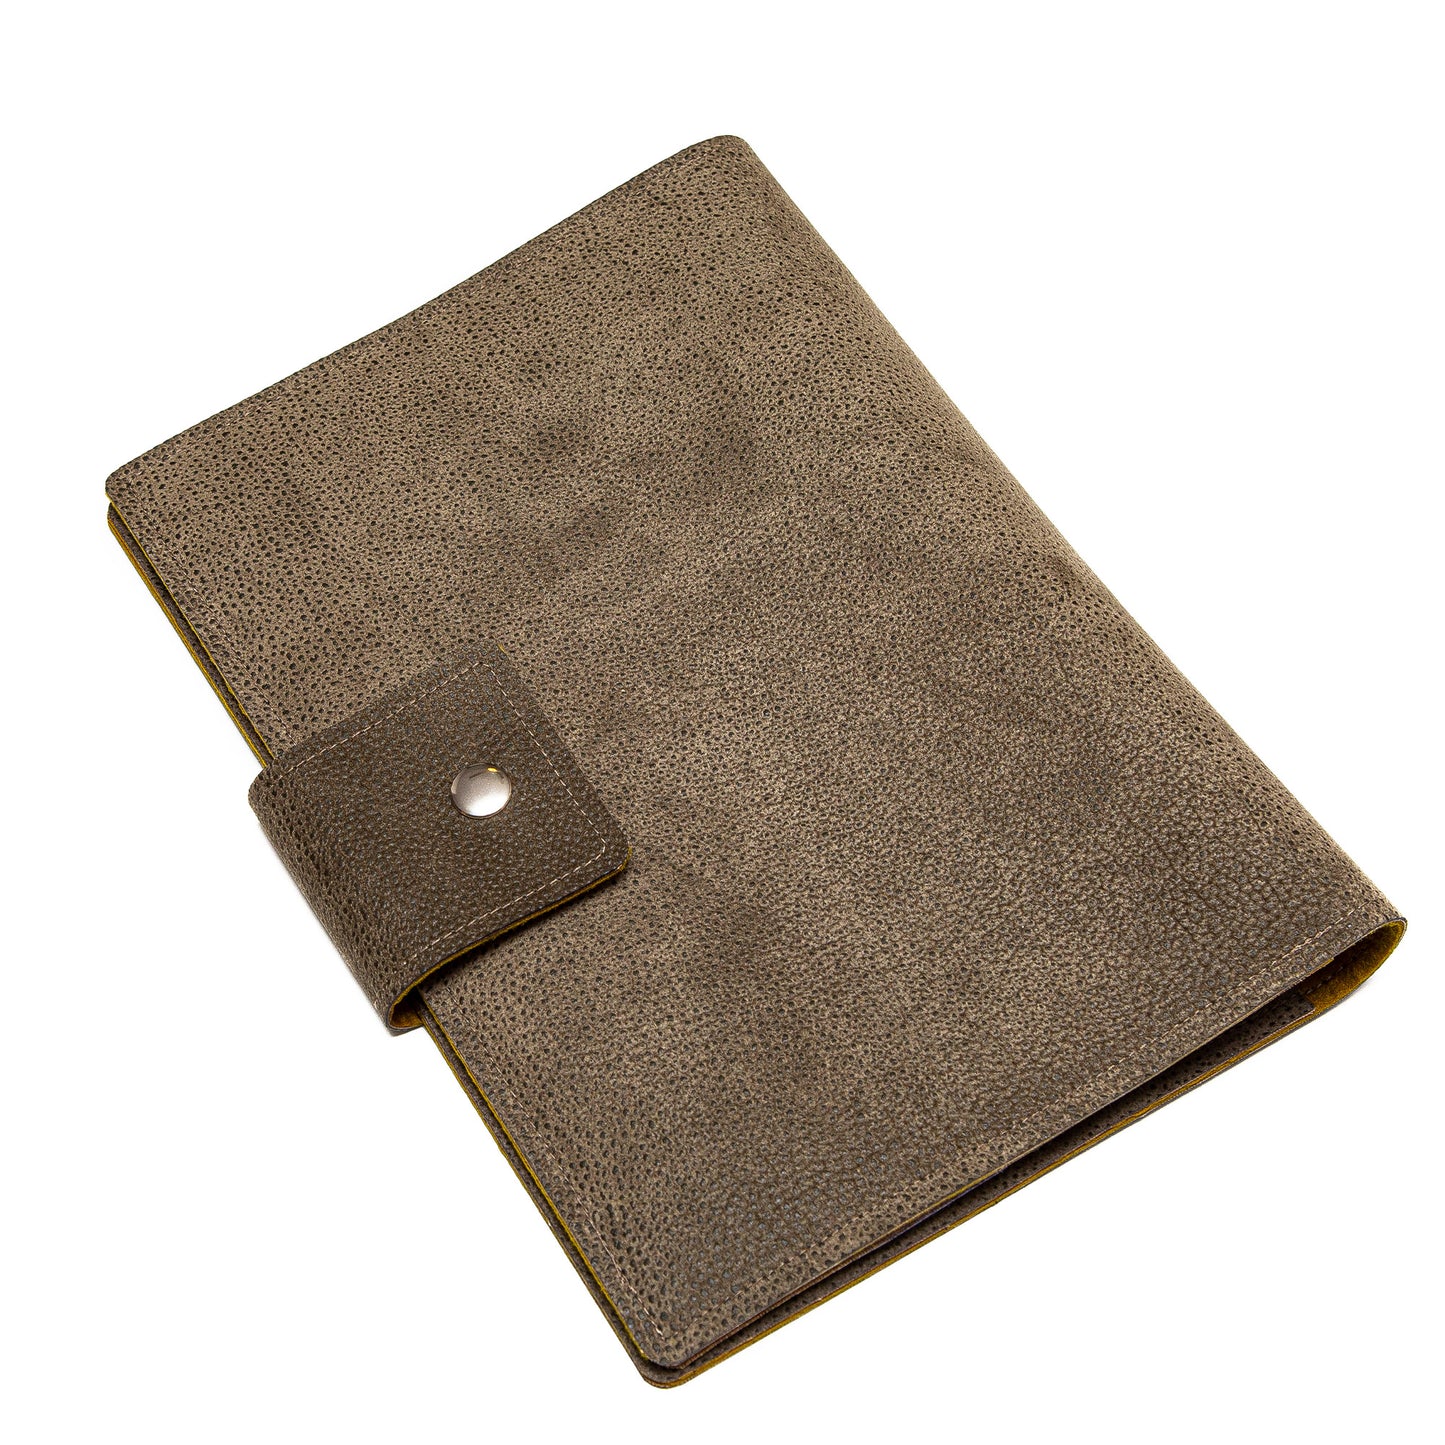 Handmade Folio Cover for iPad/Pro/Air - Brown Faux Leather